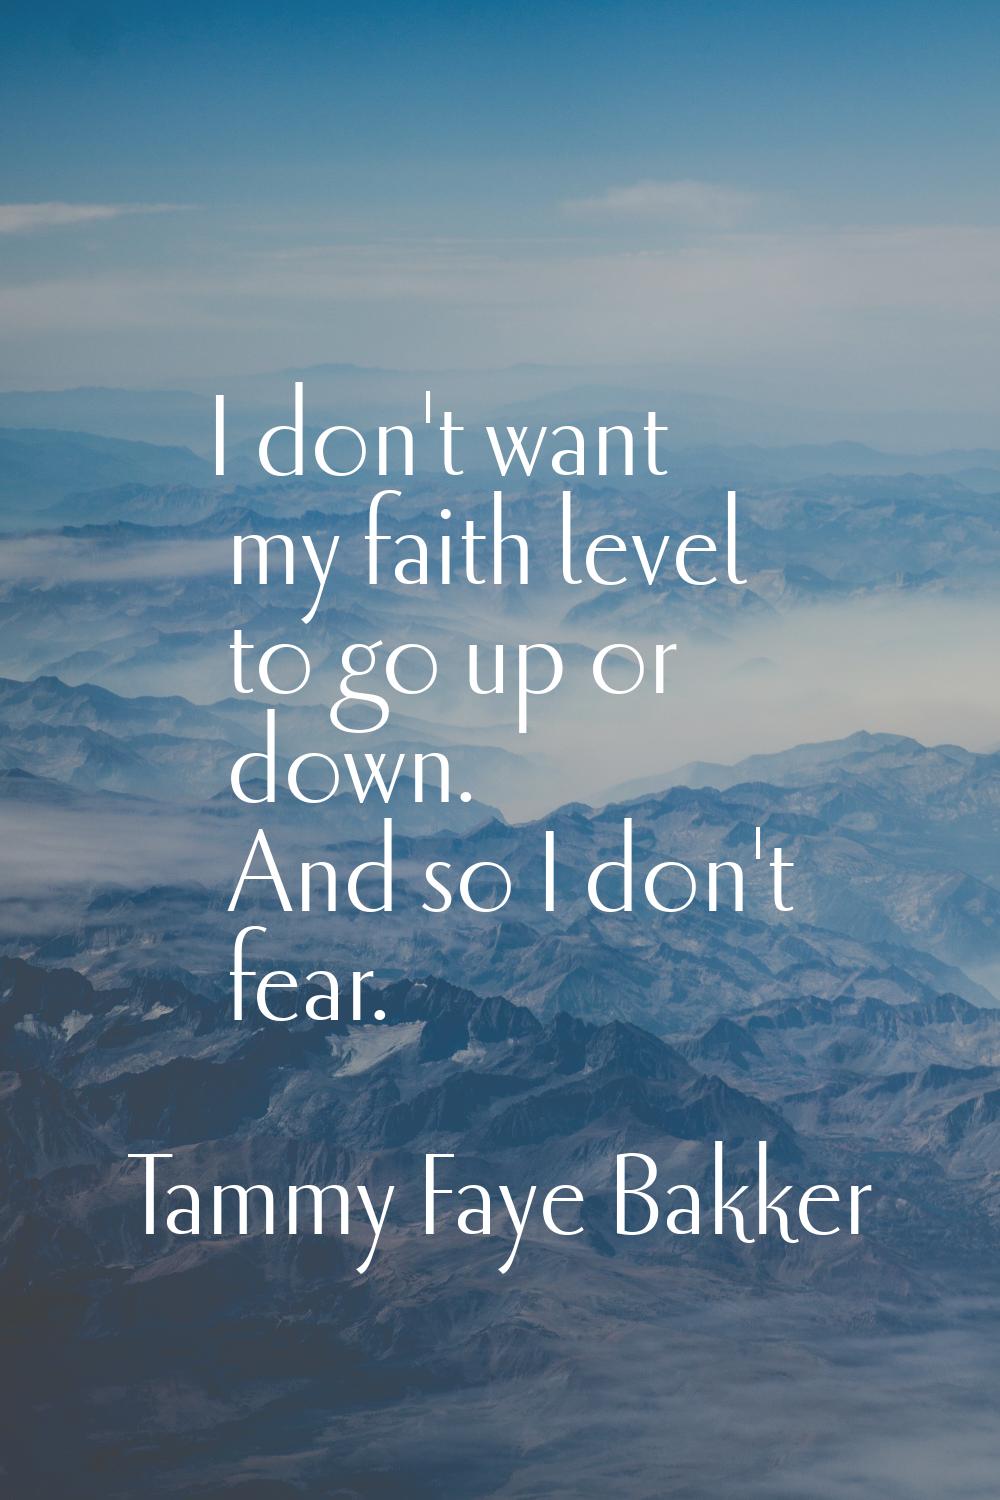 I don't want my faith level to go up or down. And so I don't fear.